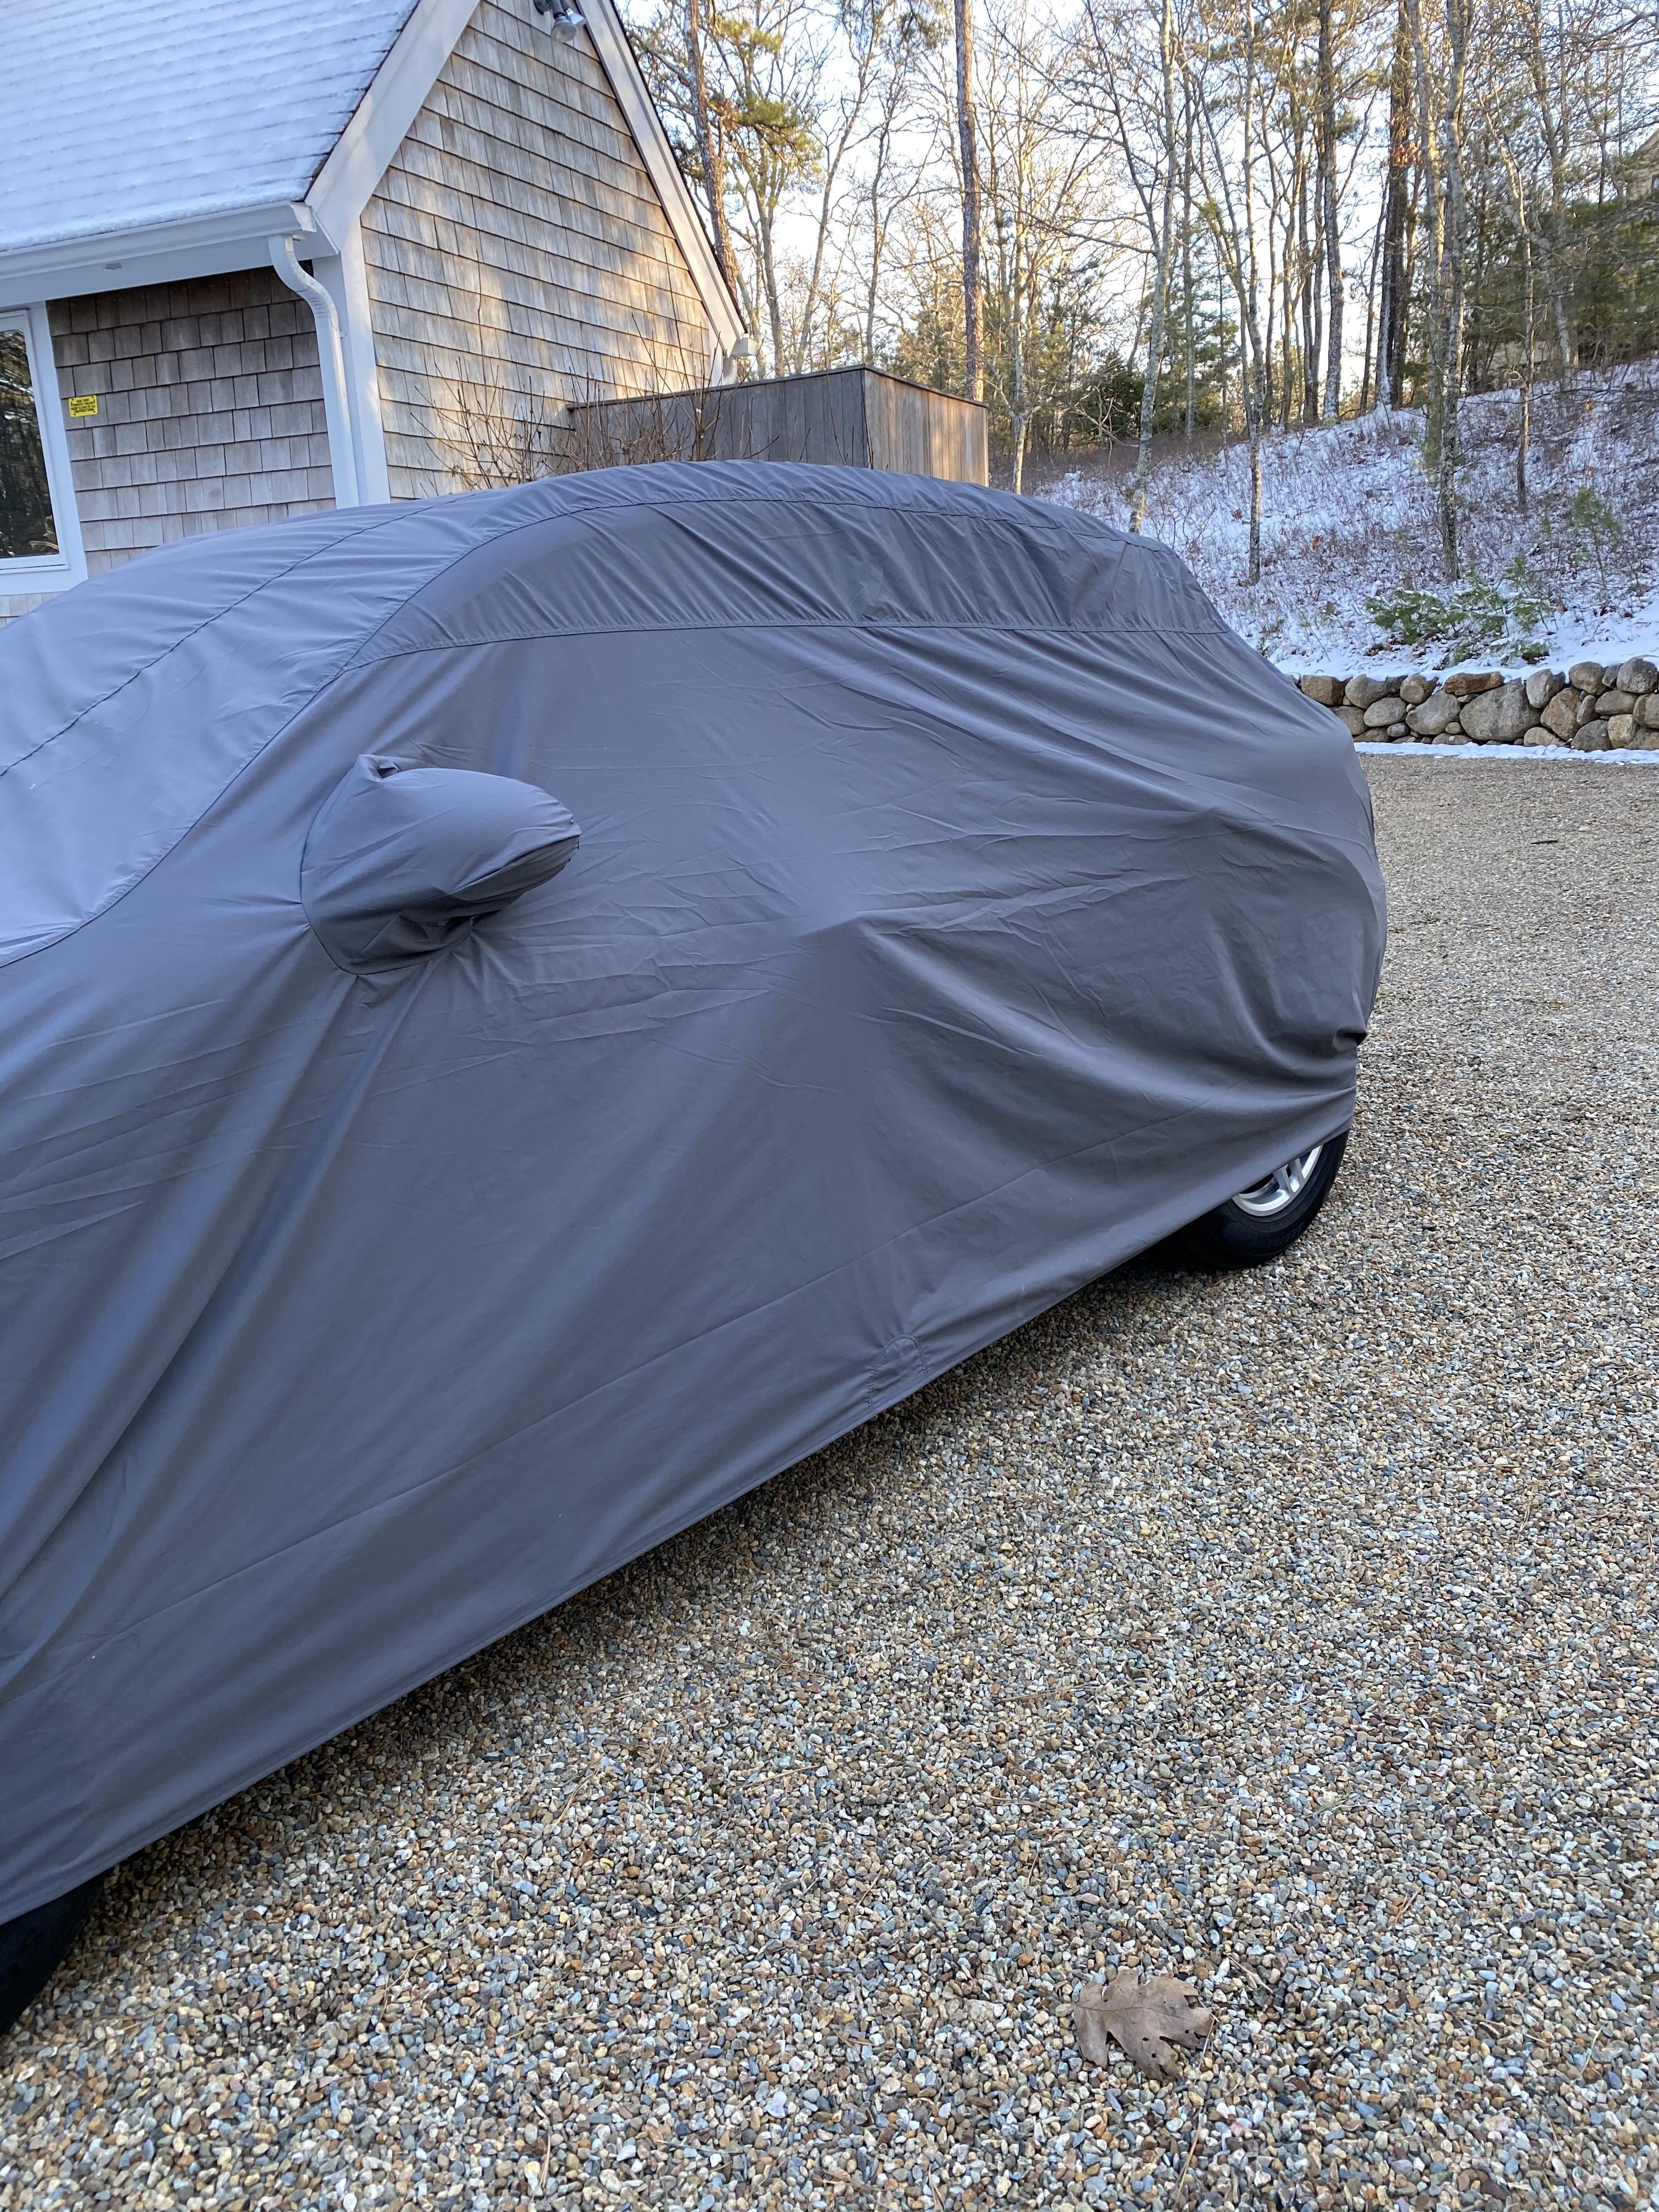 Coverking Stormproof Car Cover | CarCoverUSA